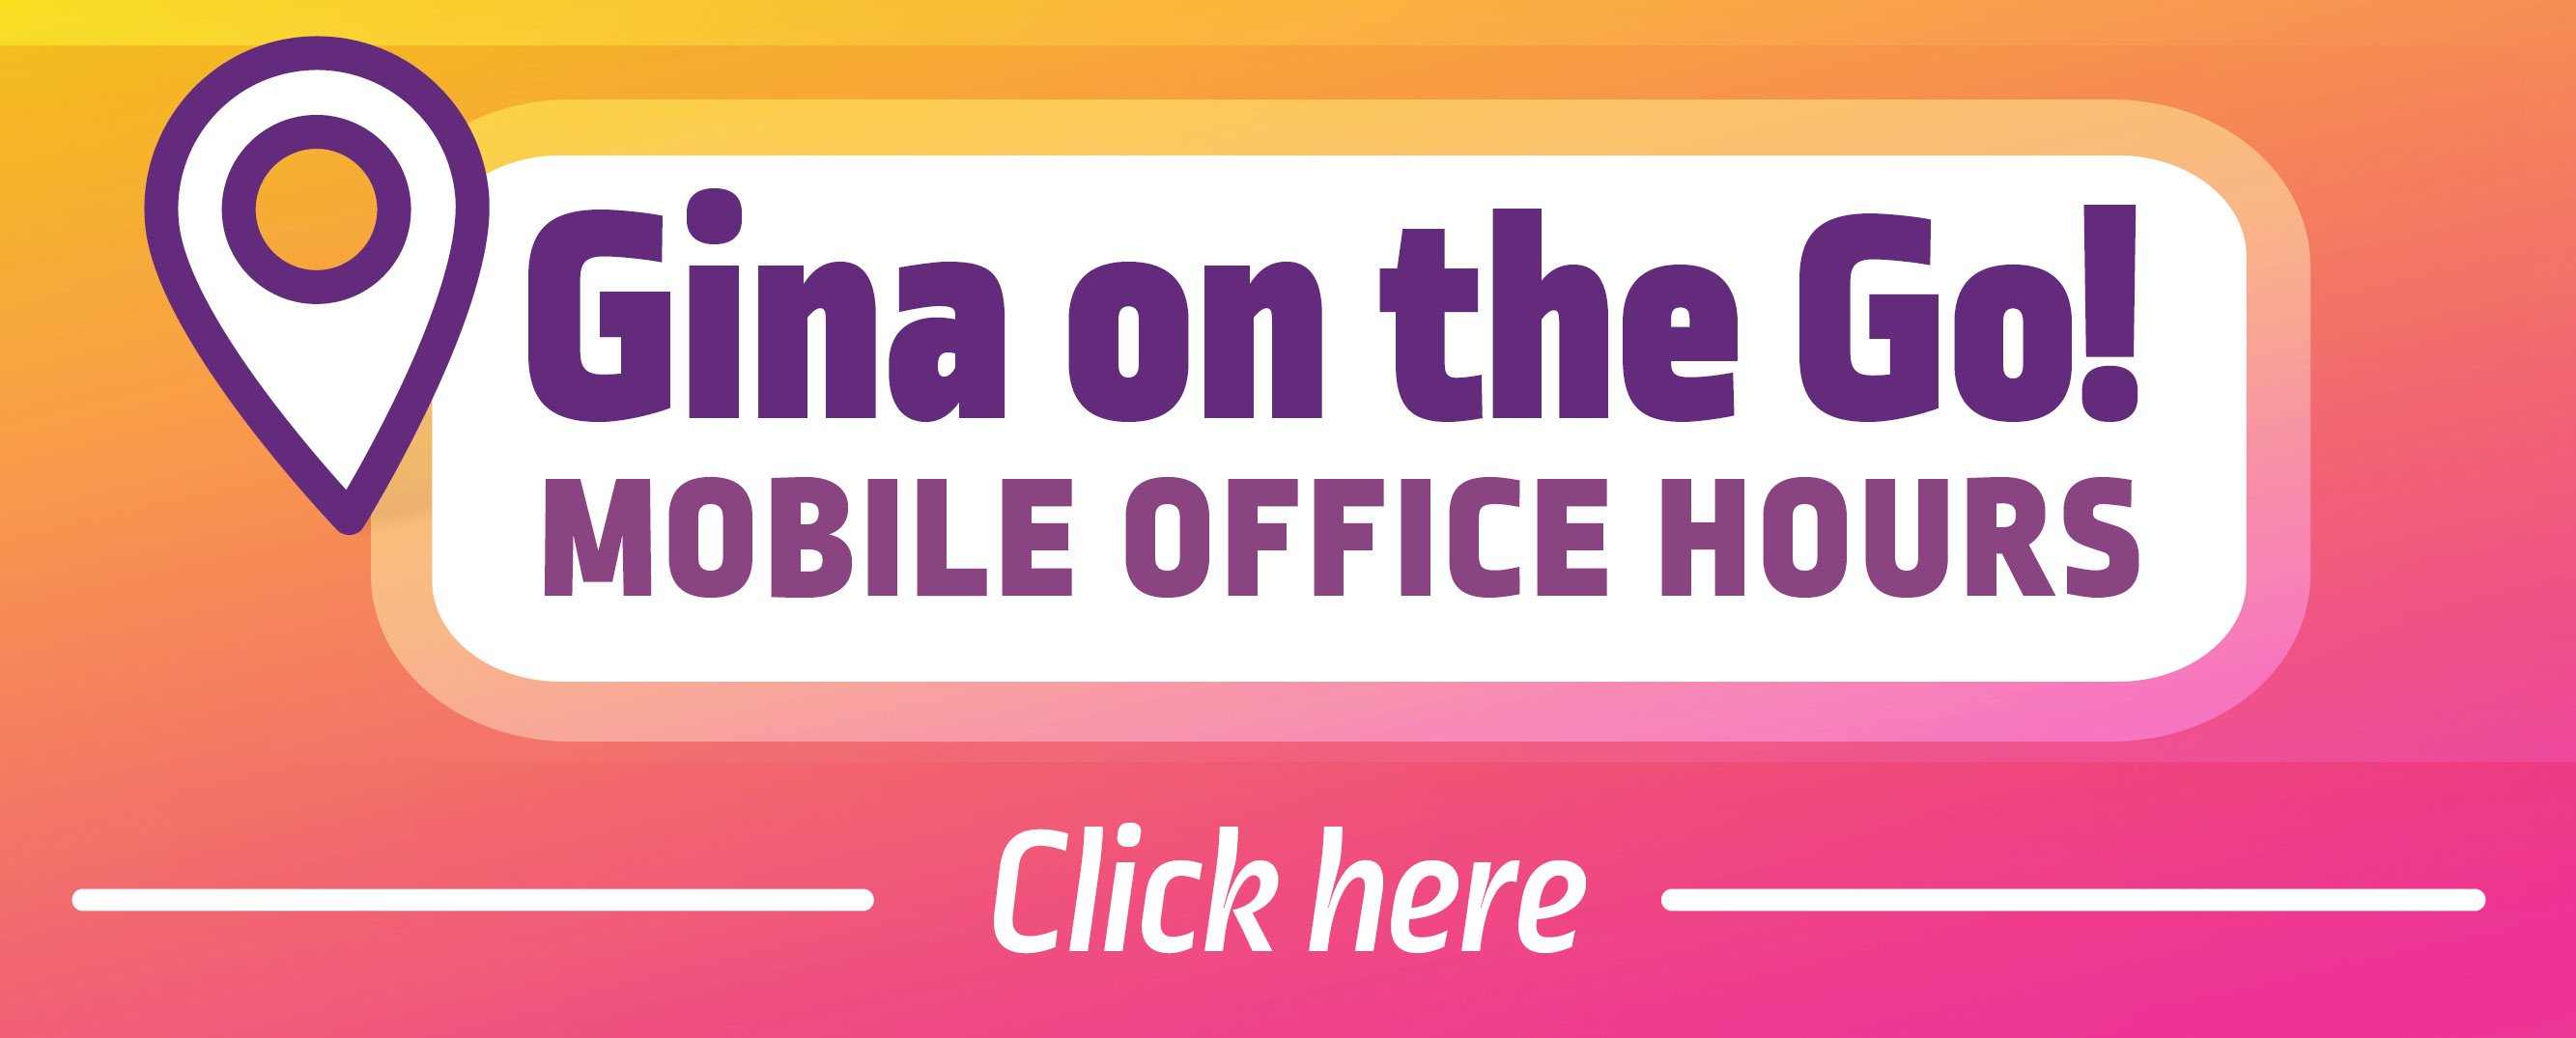 2022 Mobile Office Hours - Gina on the go